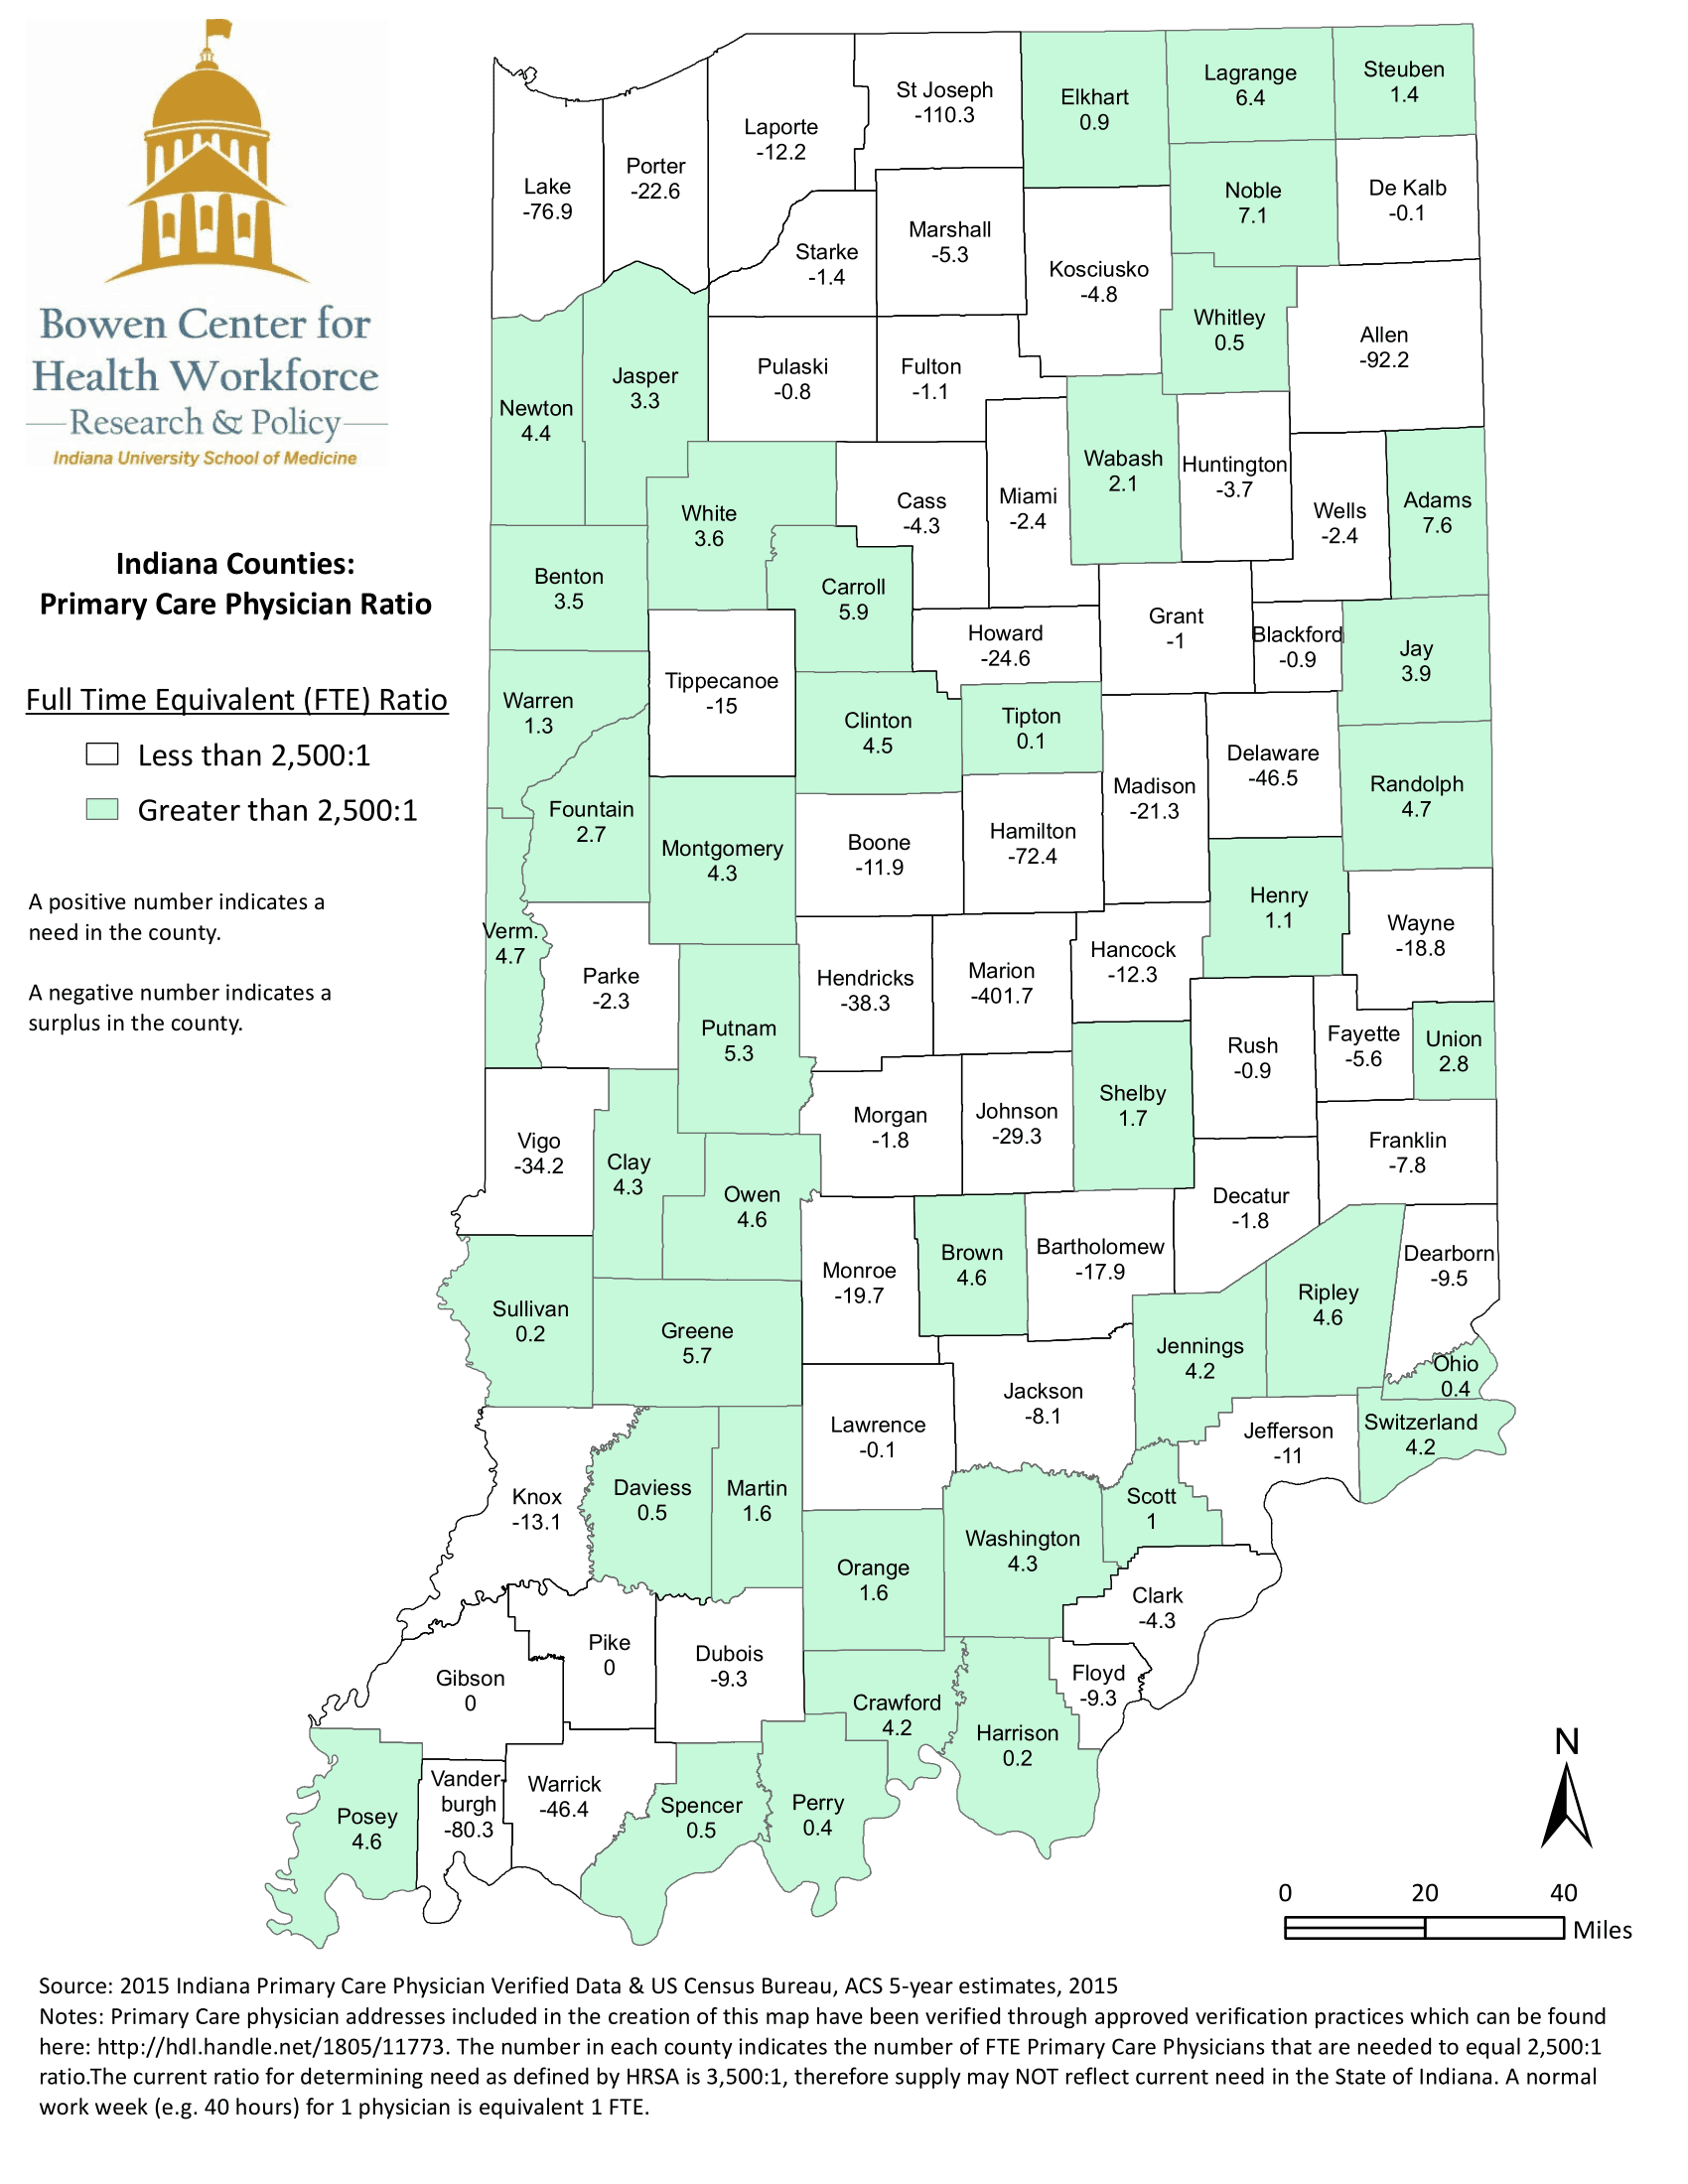 This map illustrates the geographic distribution of Indiana’s primary care physician workforce by mapping the population to primary care physician full time equivalency ratio calculated from data collected during the 2015 Indiana physician renewal process. Source: IUSM PC Scholarship Ad Hoc